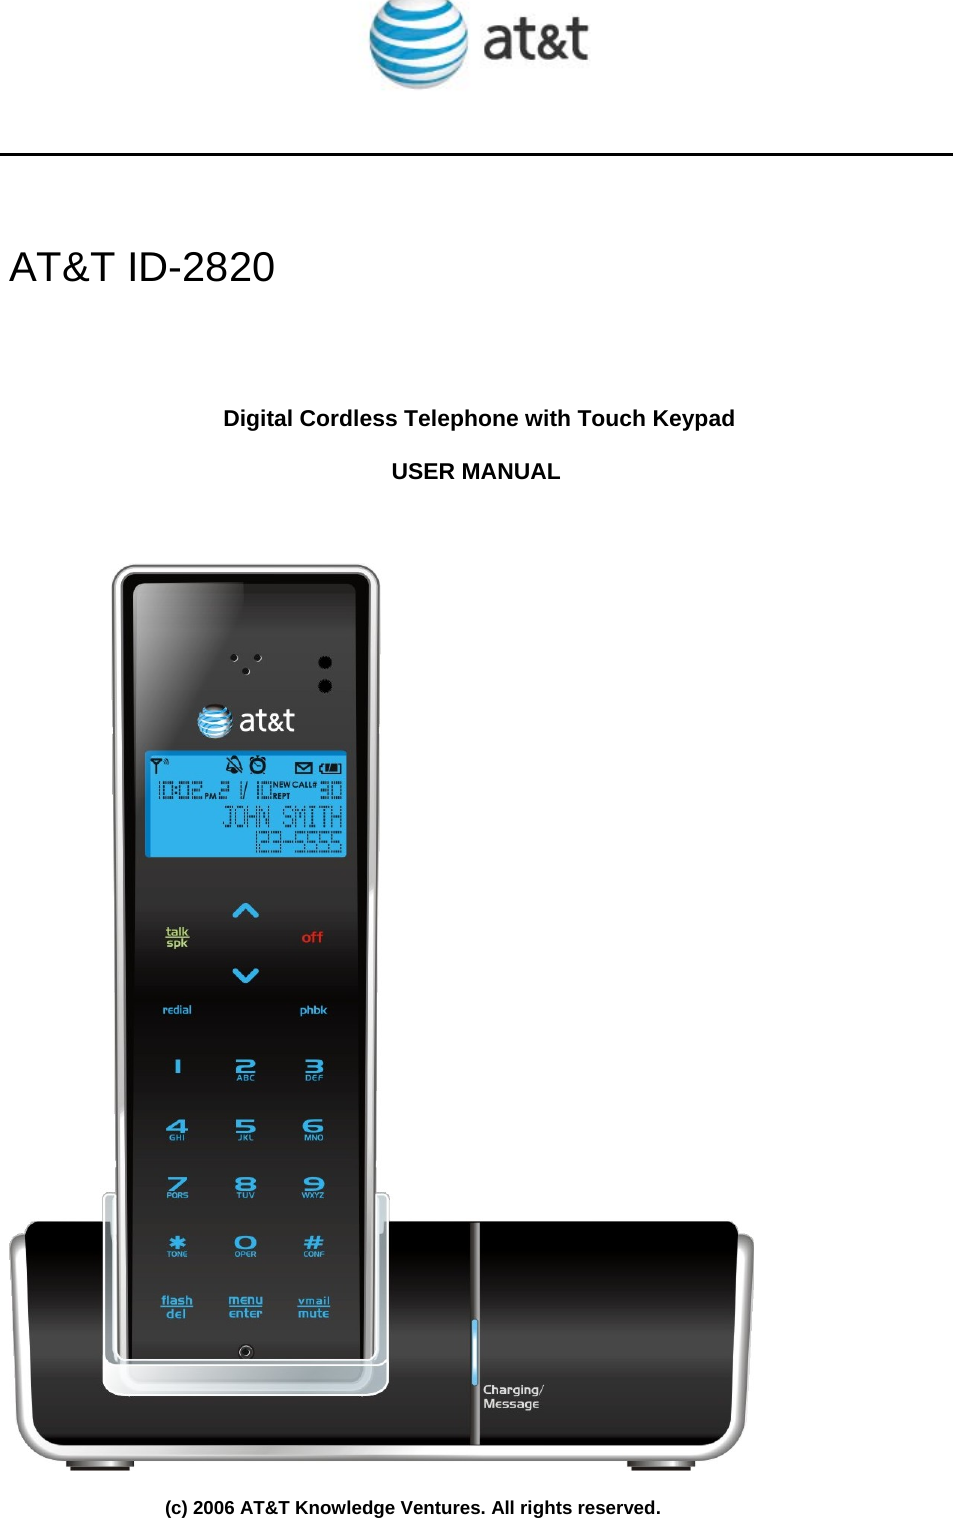         AT&amp;T ID-2820     Digital Cordless Telephone with Touch Keypad  USER MANUAL        (c) 2006 AT&amp;T Knowledge Ventures. All rights reserved. 